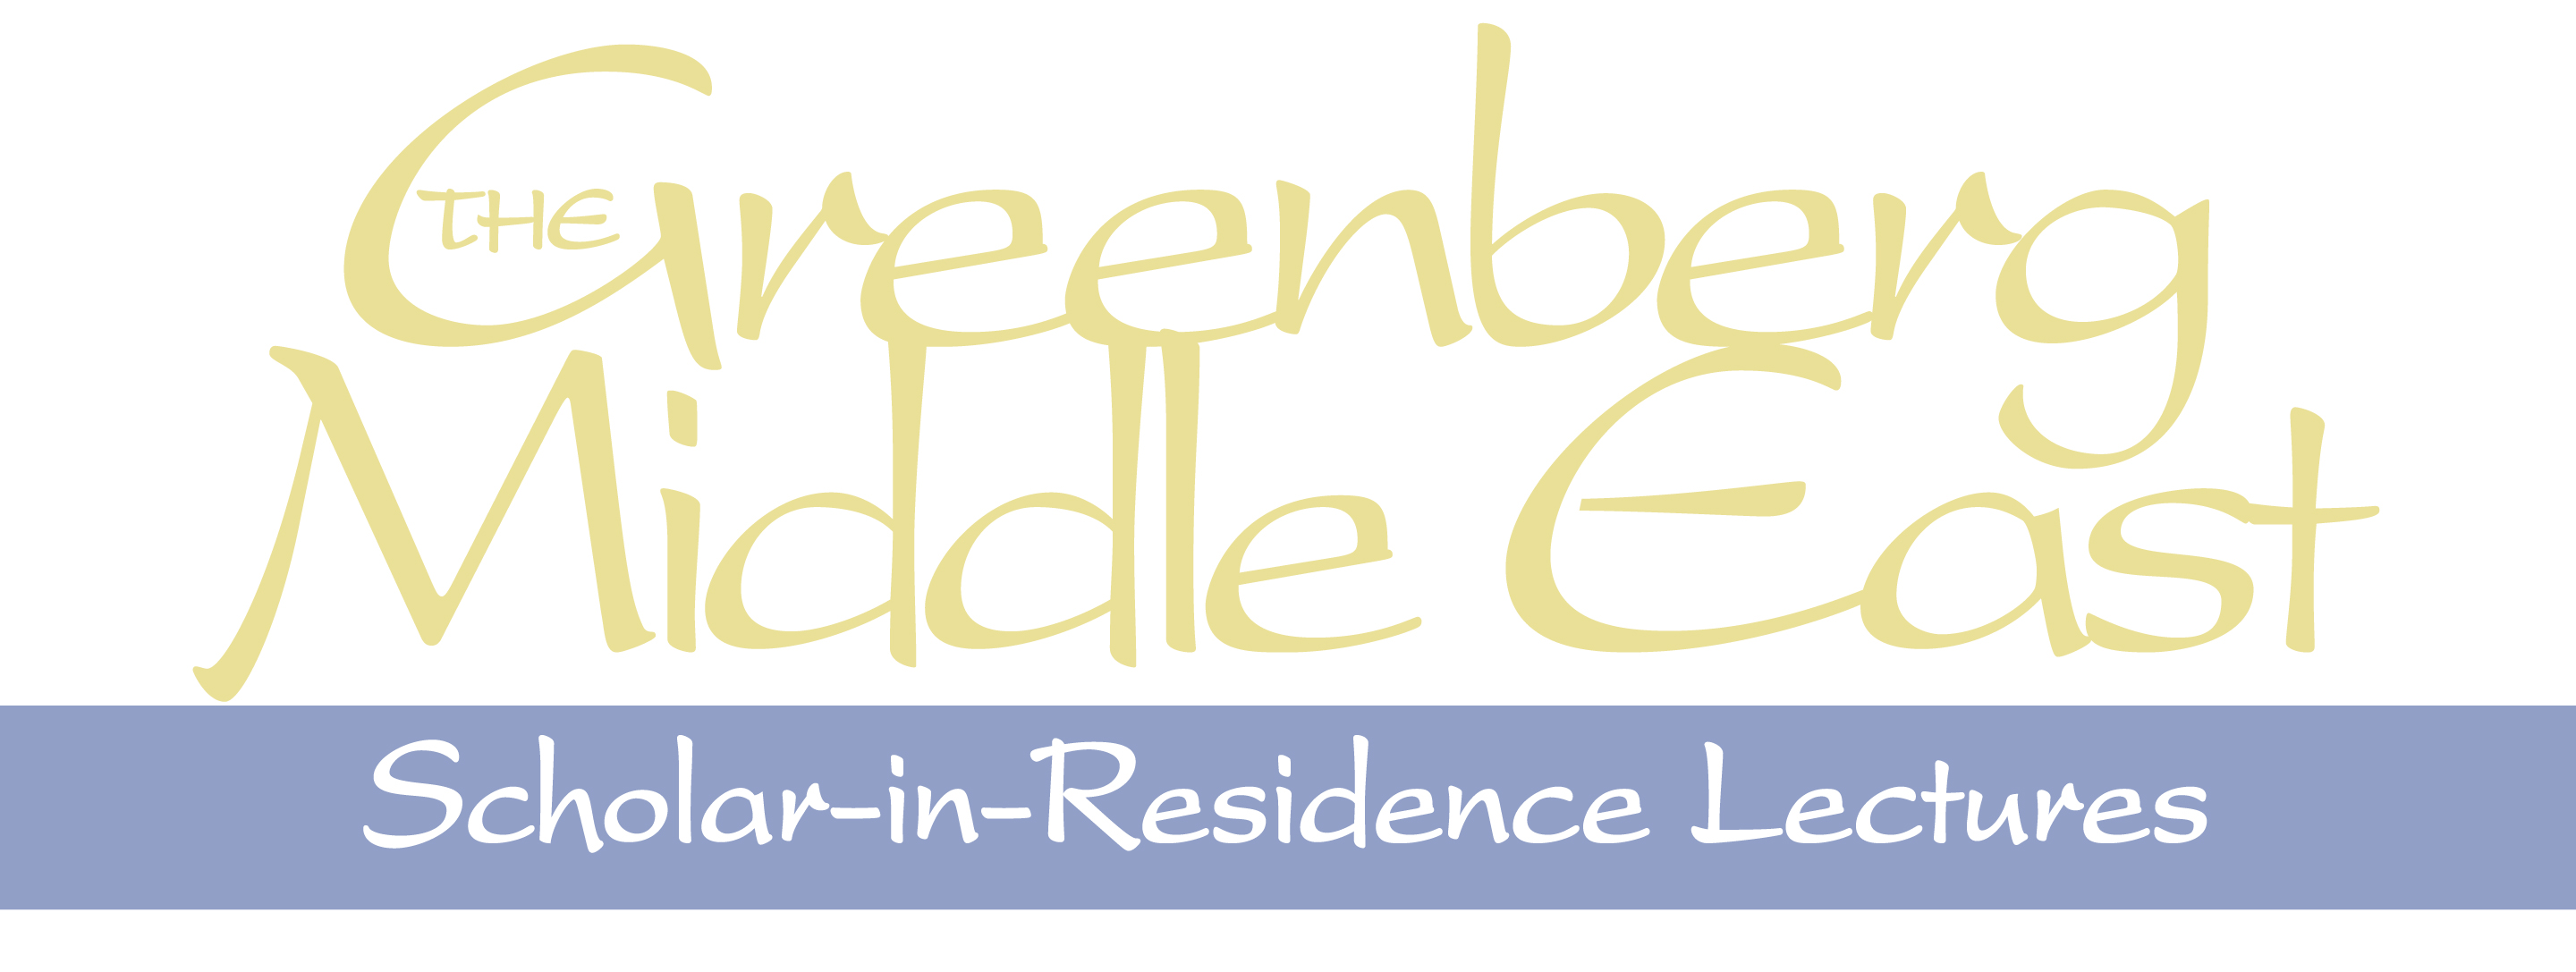 Greenberg Middle East Scholar-In-Residence